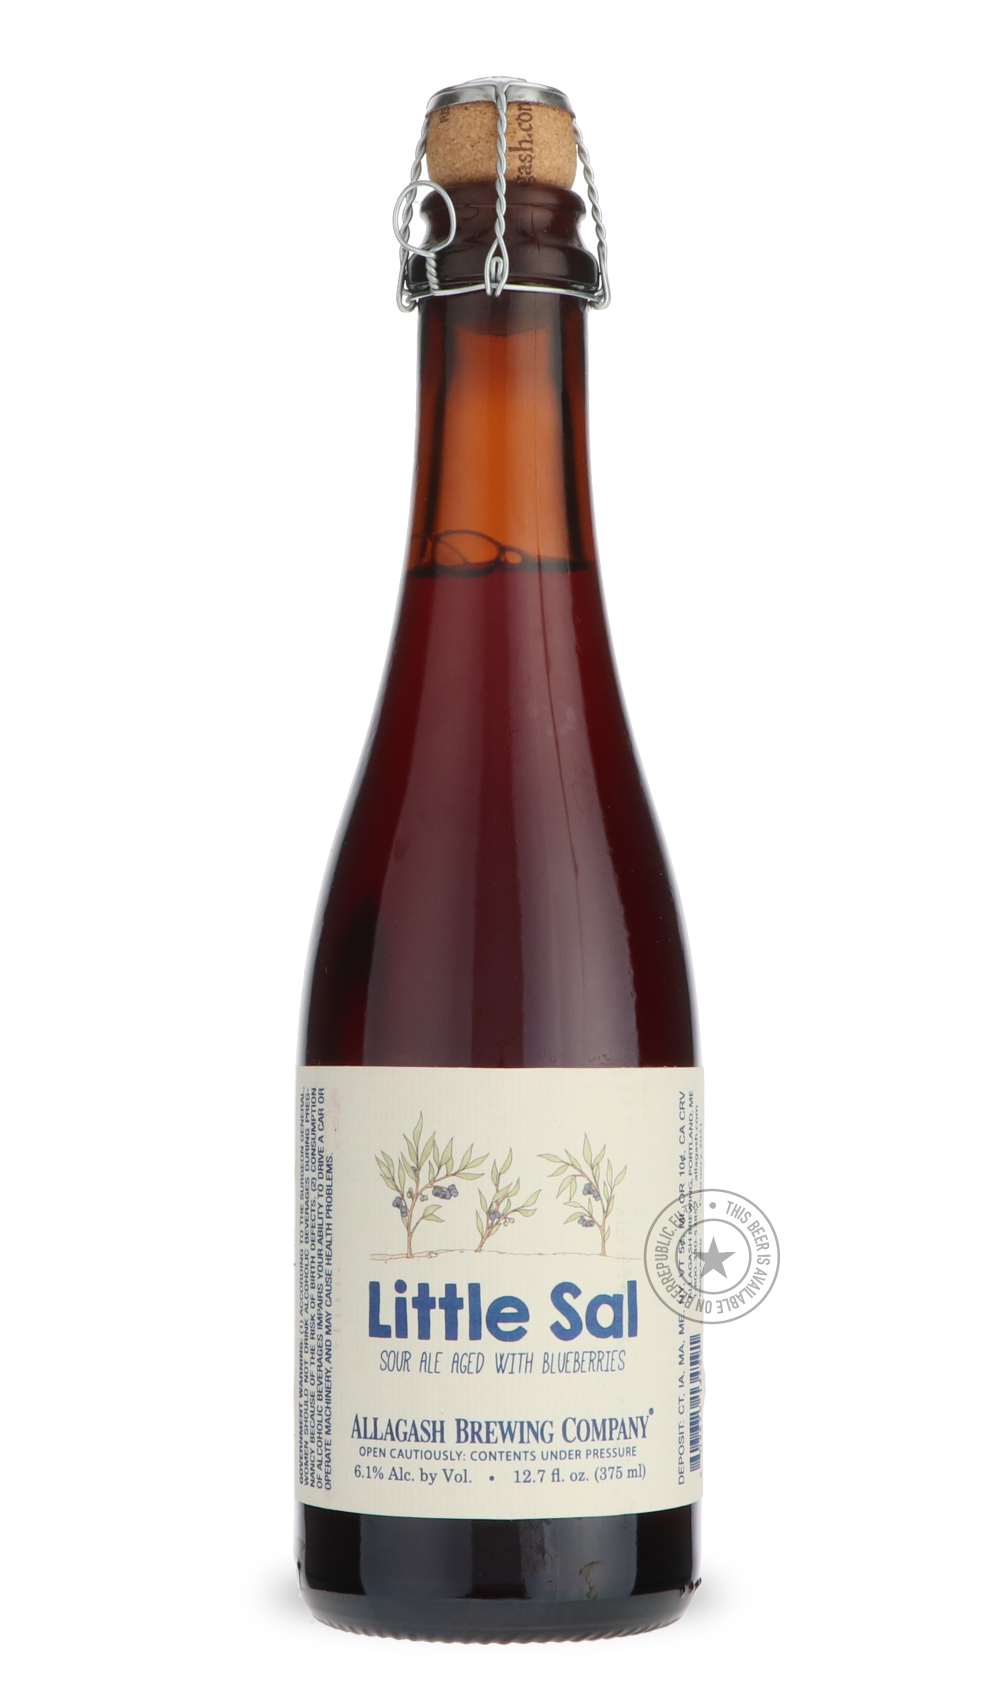 -Allagash- Little Sal-Sour / Wild & Fruity- Only @ Beer Republic - The best online beer store for American & Canadian craft beer - Buy beer online from the USA and Canada - Bier online kopen - Amerikaans bier kopen - Craft beer store - Craft beer kopen - Amerikanisch bier kaufen - Bier online kaufen - Acheter biere online - IPA - Stout - Porter - New England IPA - Hazy IPA - Imperial Stout - Barrel Aged - Barrel Aged Imperial Stout - Brown - Dark beer - Blond - Blonde - Pilsner - Lager - Wheat - Weizen - Am